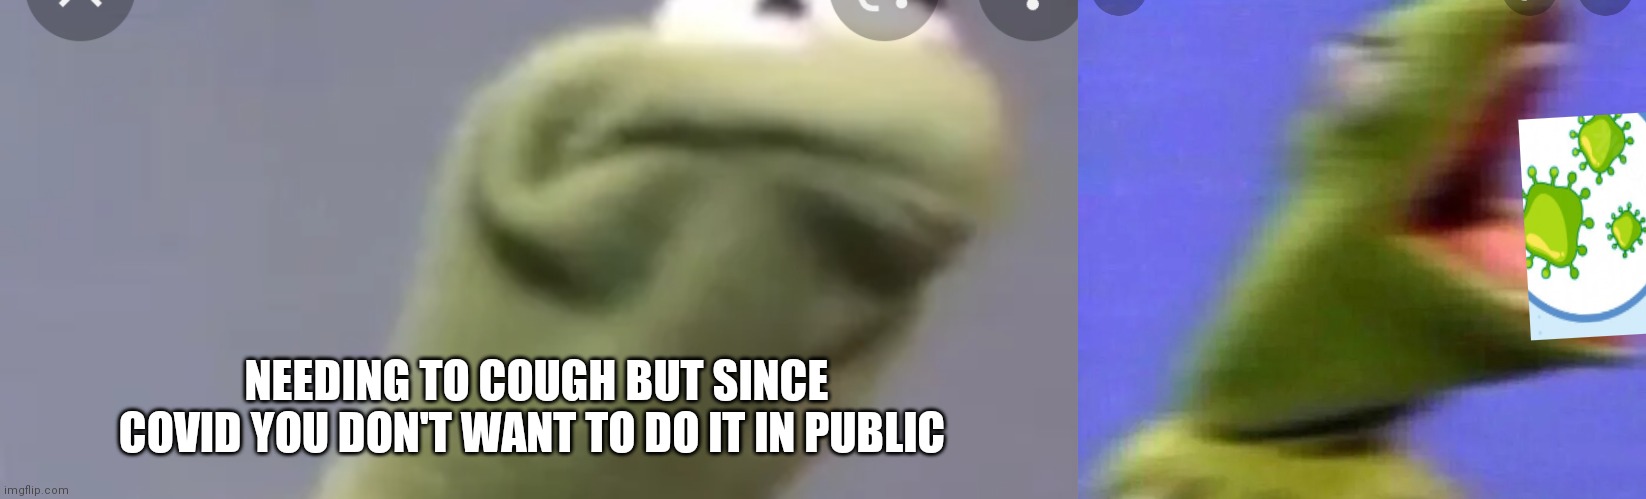 Need to caugh | NEEDING TO COUGH BUT SINCE COVID YOU DON'T WANT TO DO IT IN PUBLIC | image tagged in funny memes | made w/ Imgflip meme maker